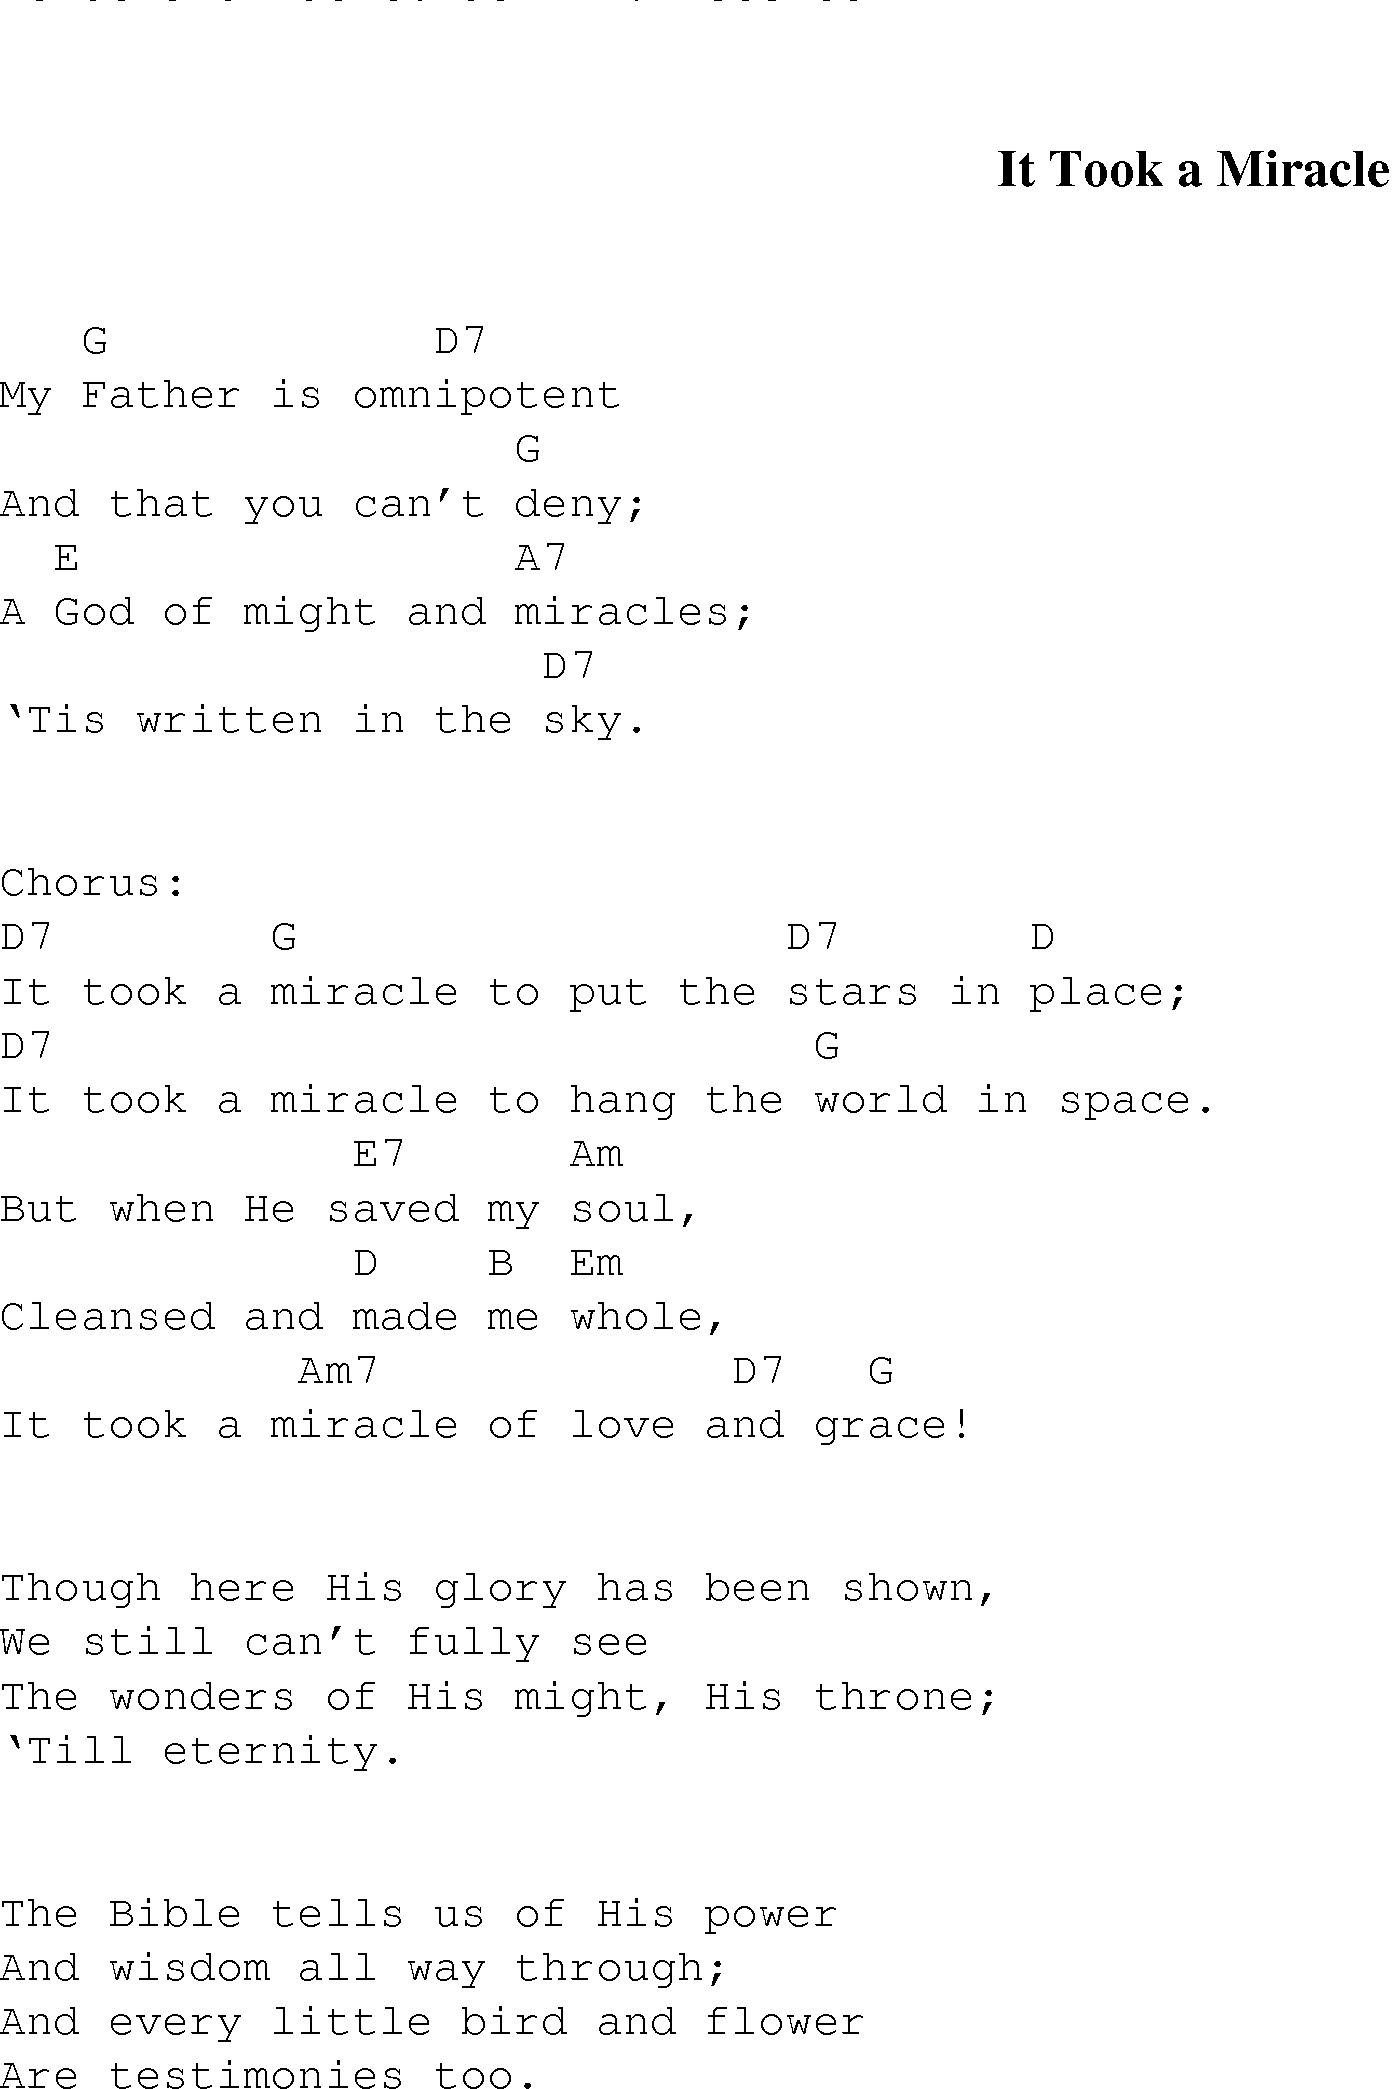 Gospel Song: it_took_a_miracle, lyrics and chords.